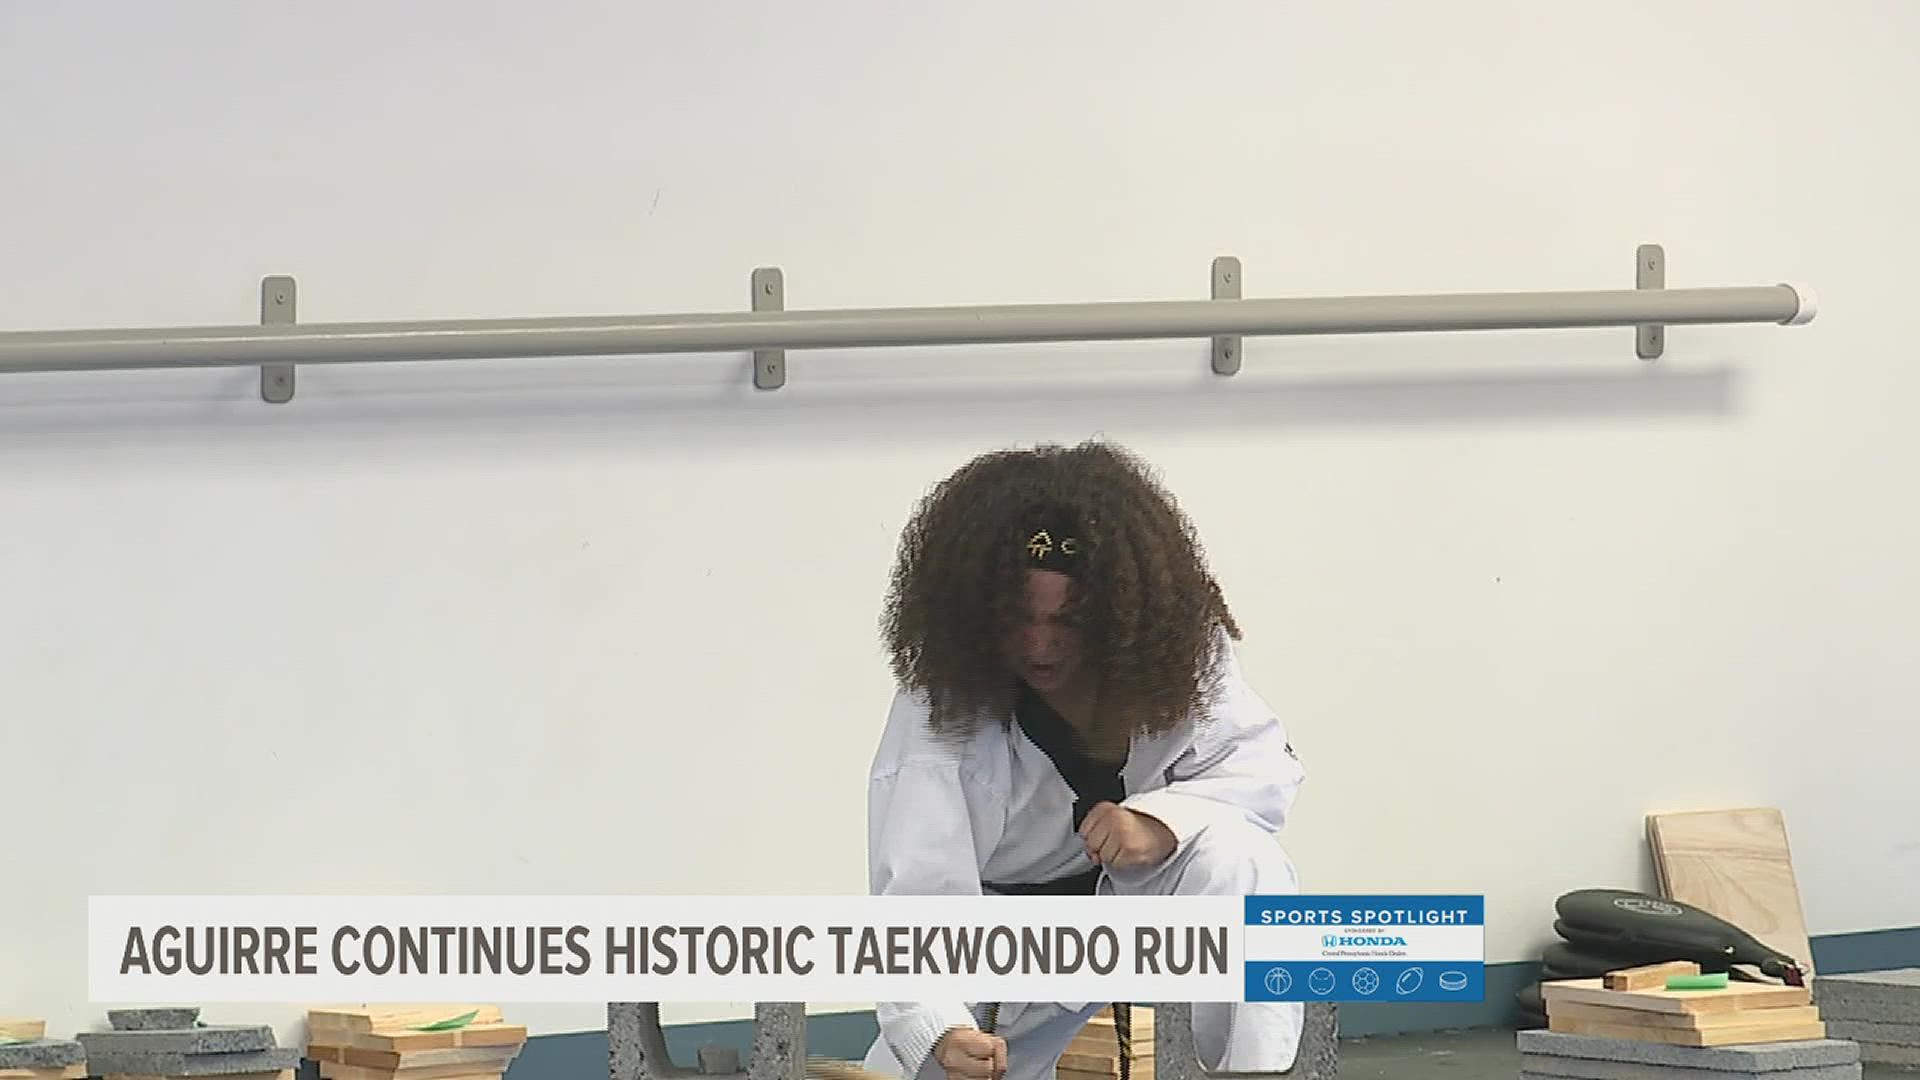 Aguirre becomes one of the youngest third-degree black belts in taekwondo history